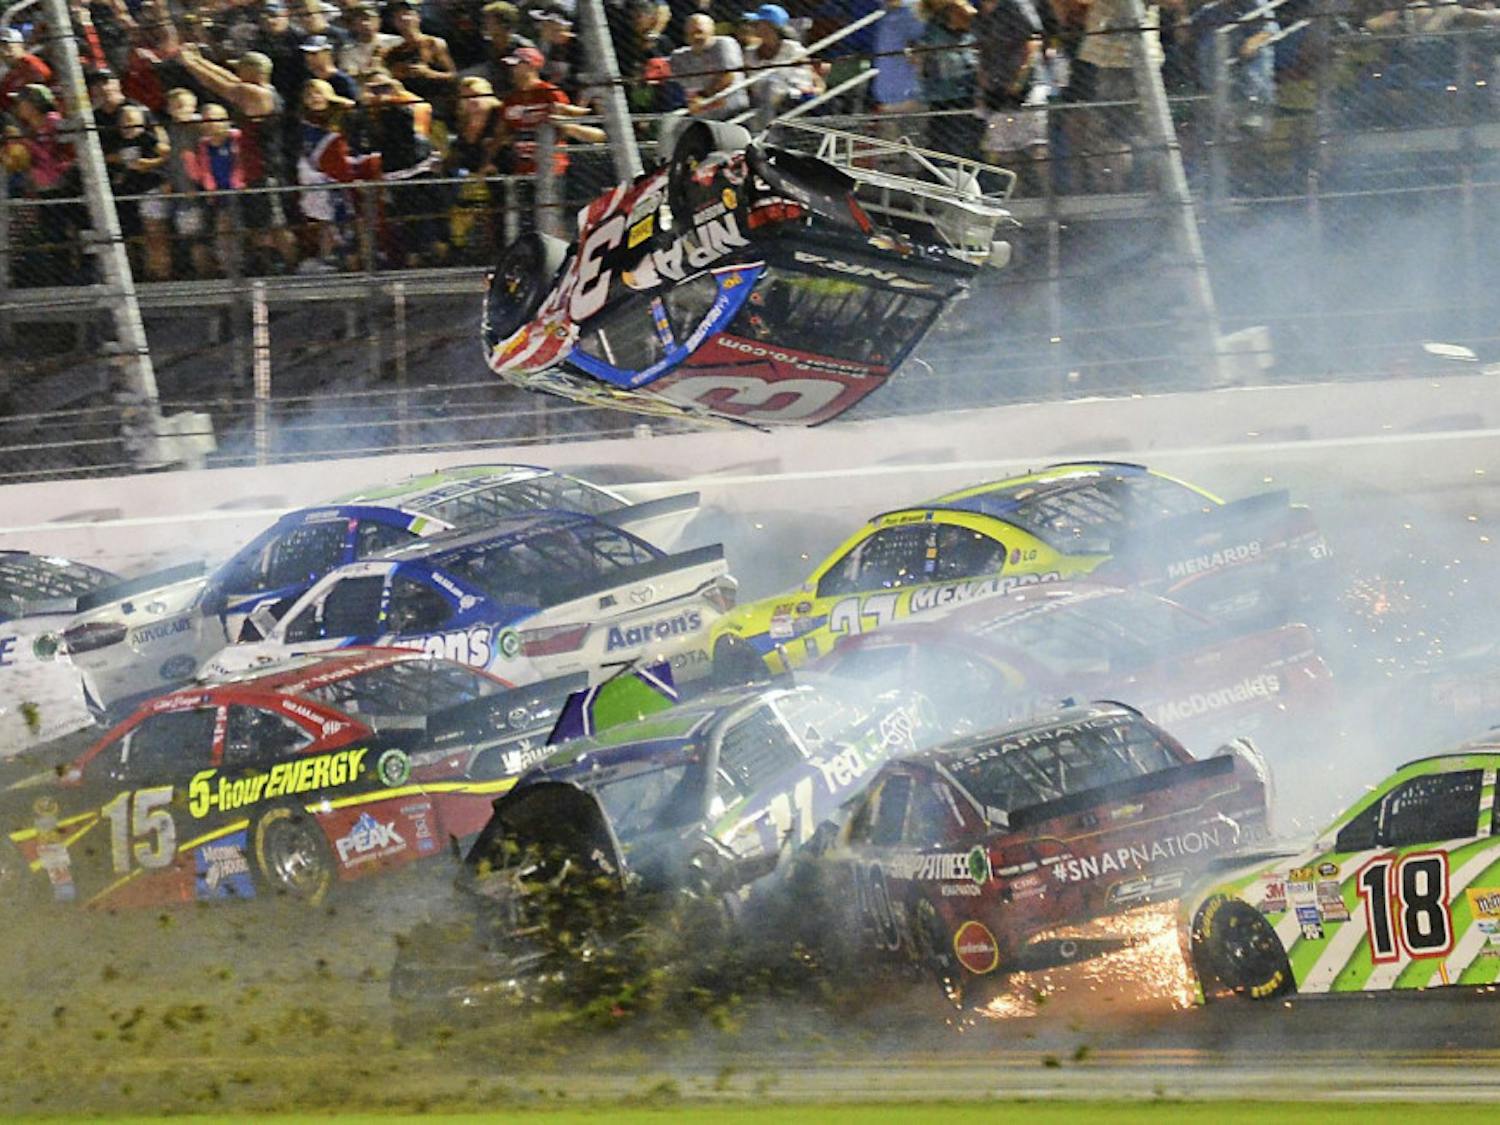 Austin Dillon (3) goes airborne as he was involved in a multi-car crash on the final lap of the NASCAR Sprint Cup series auto race at Daytona International Speedway in Daytona Beach, Florida.